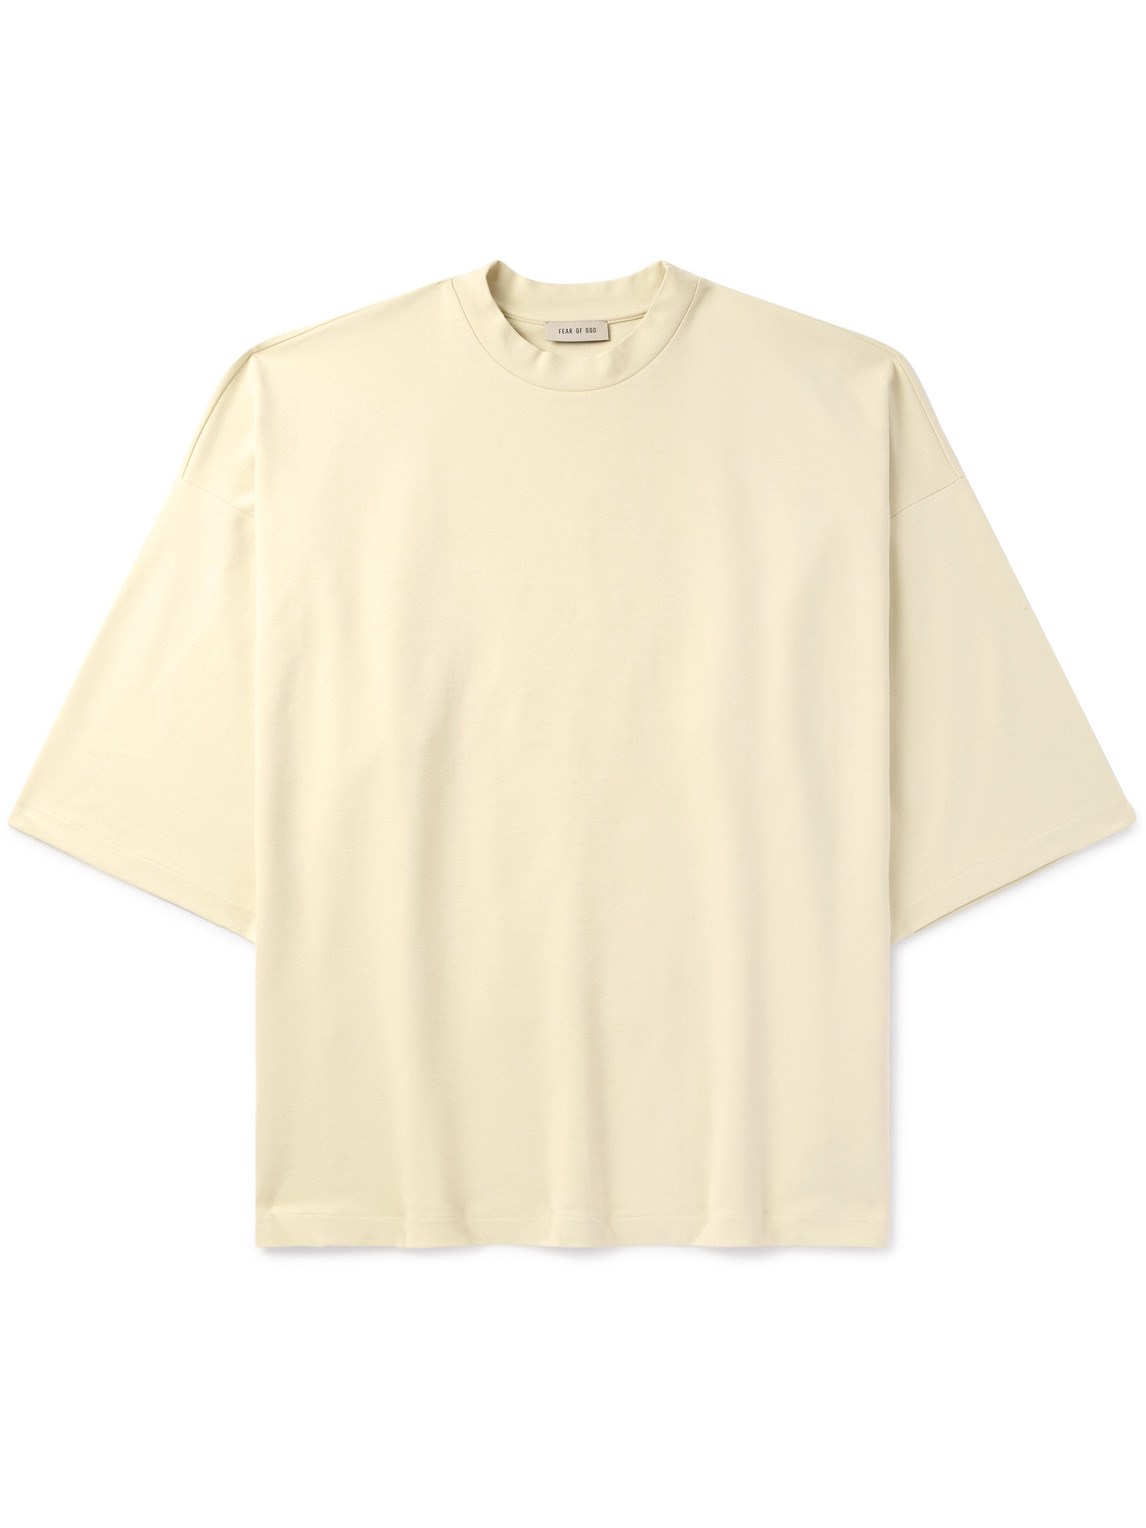 Fear of God - Thunderbird Milano Oversized Embroidered Jersey T-Shirt - Men - Yellow - S von Fear of God